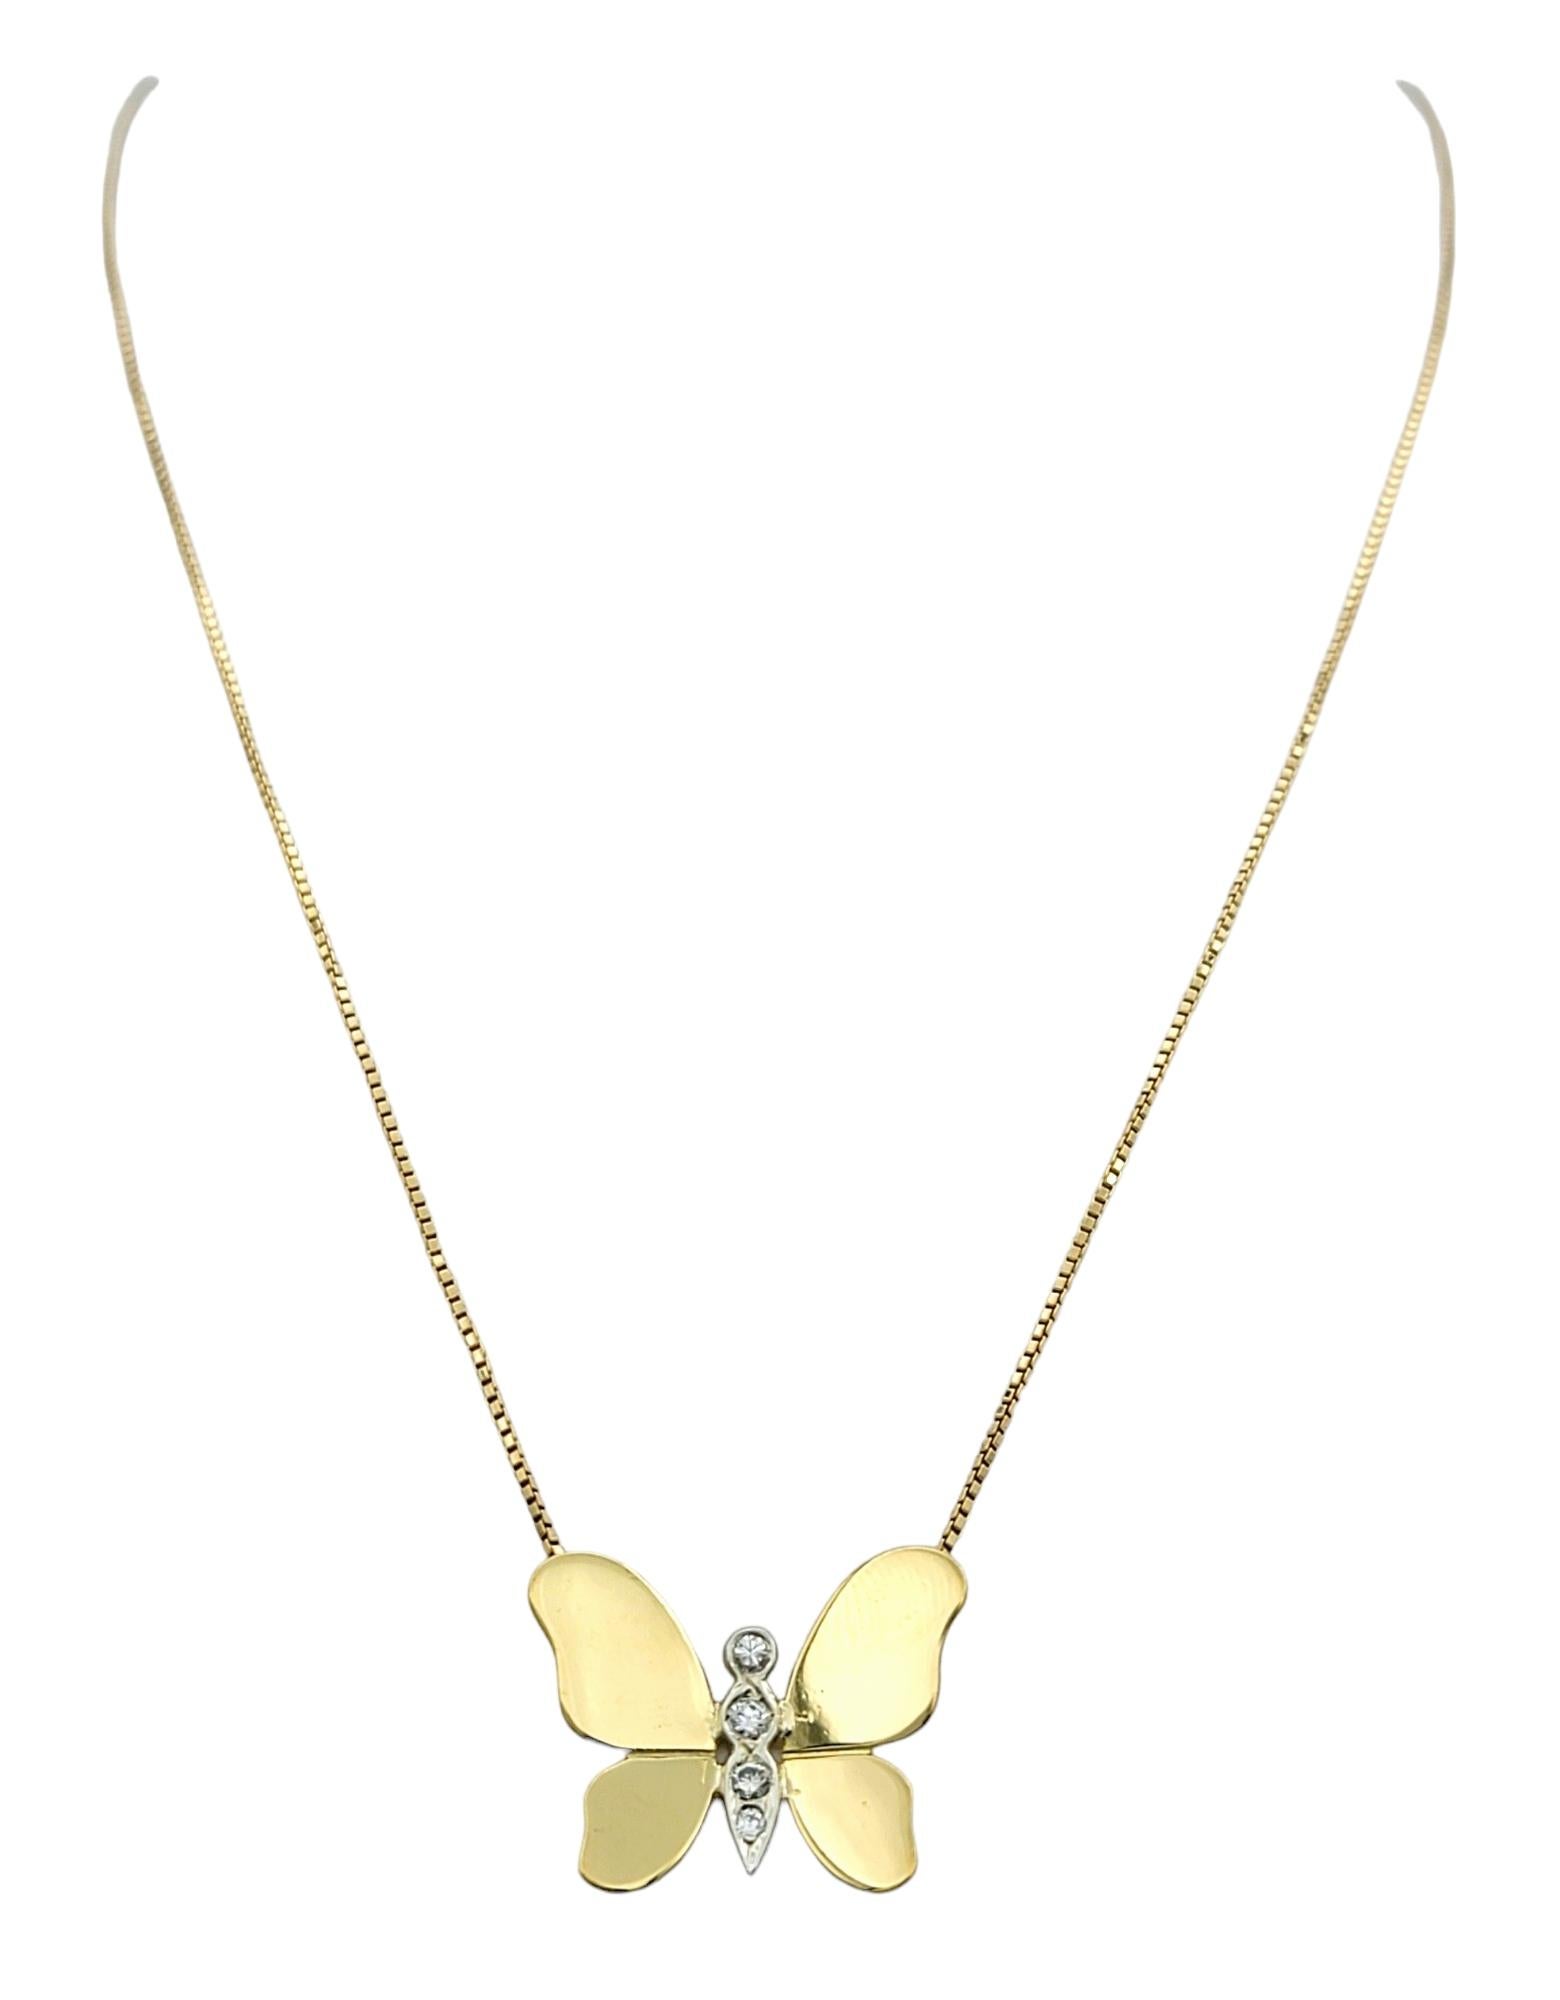 Contemporary Butterfly Pendant Necklace with Diamonds Set in Polished 18 Karat Yellow Gold For Sale